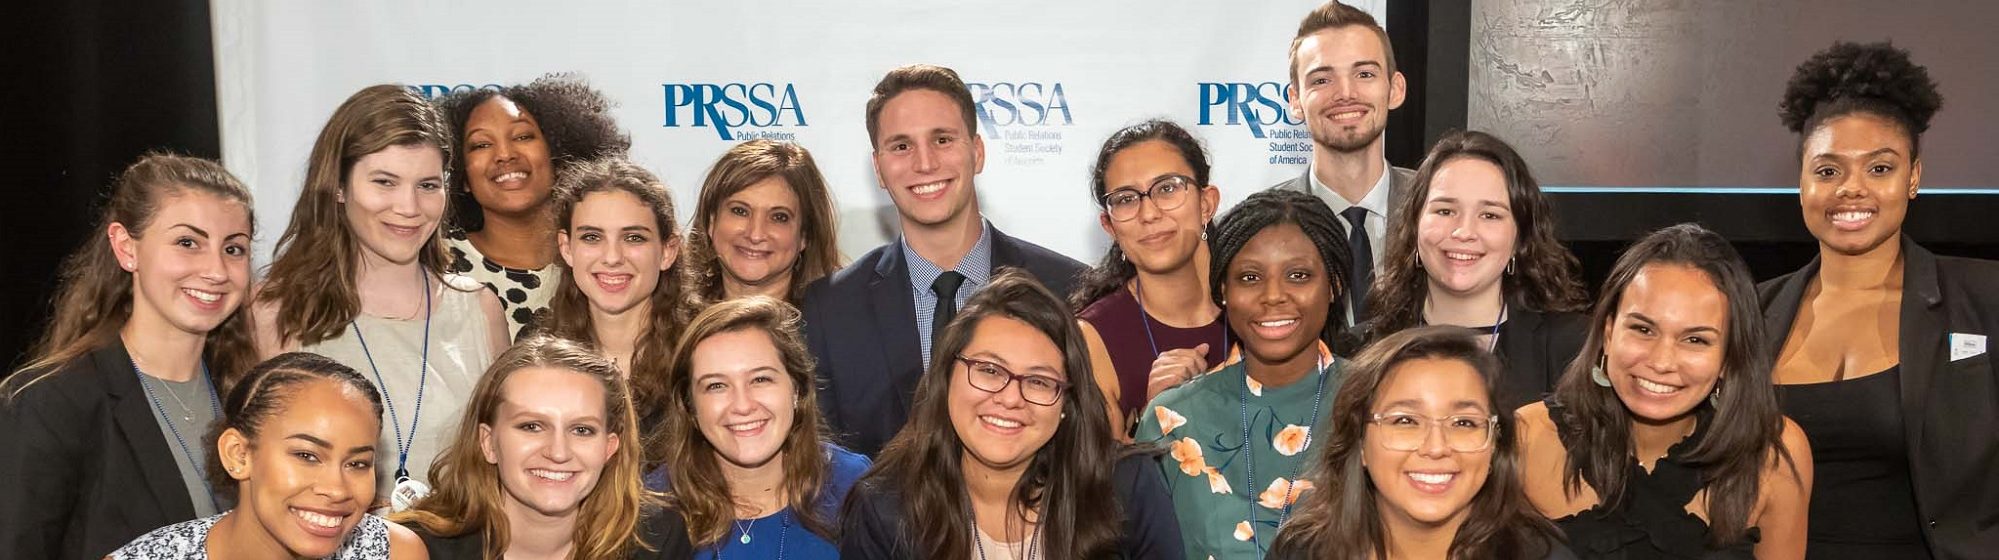 Large group of students in front of PRSSA logo backdrop